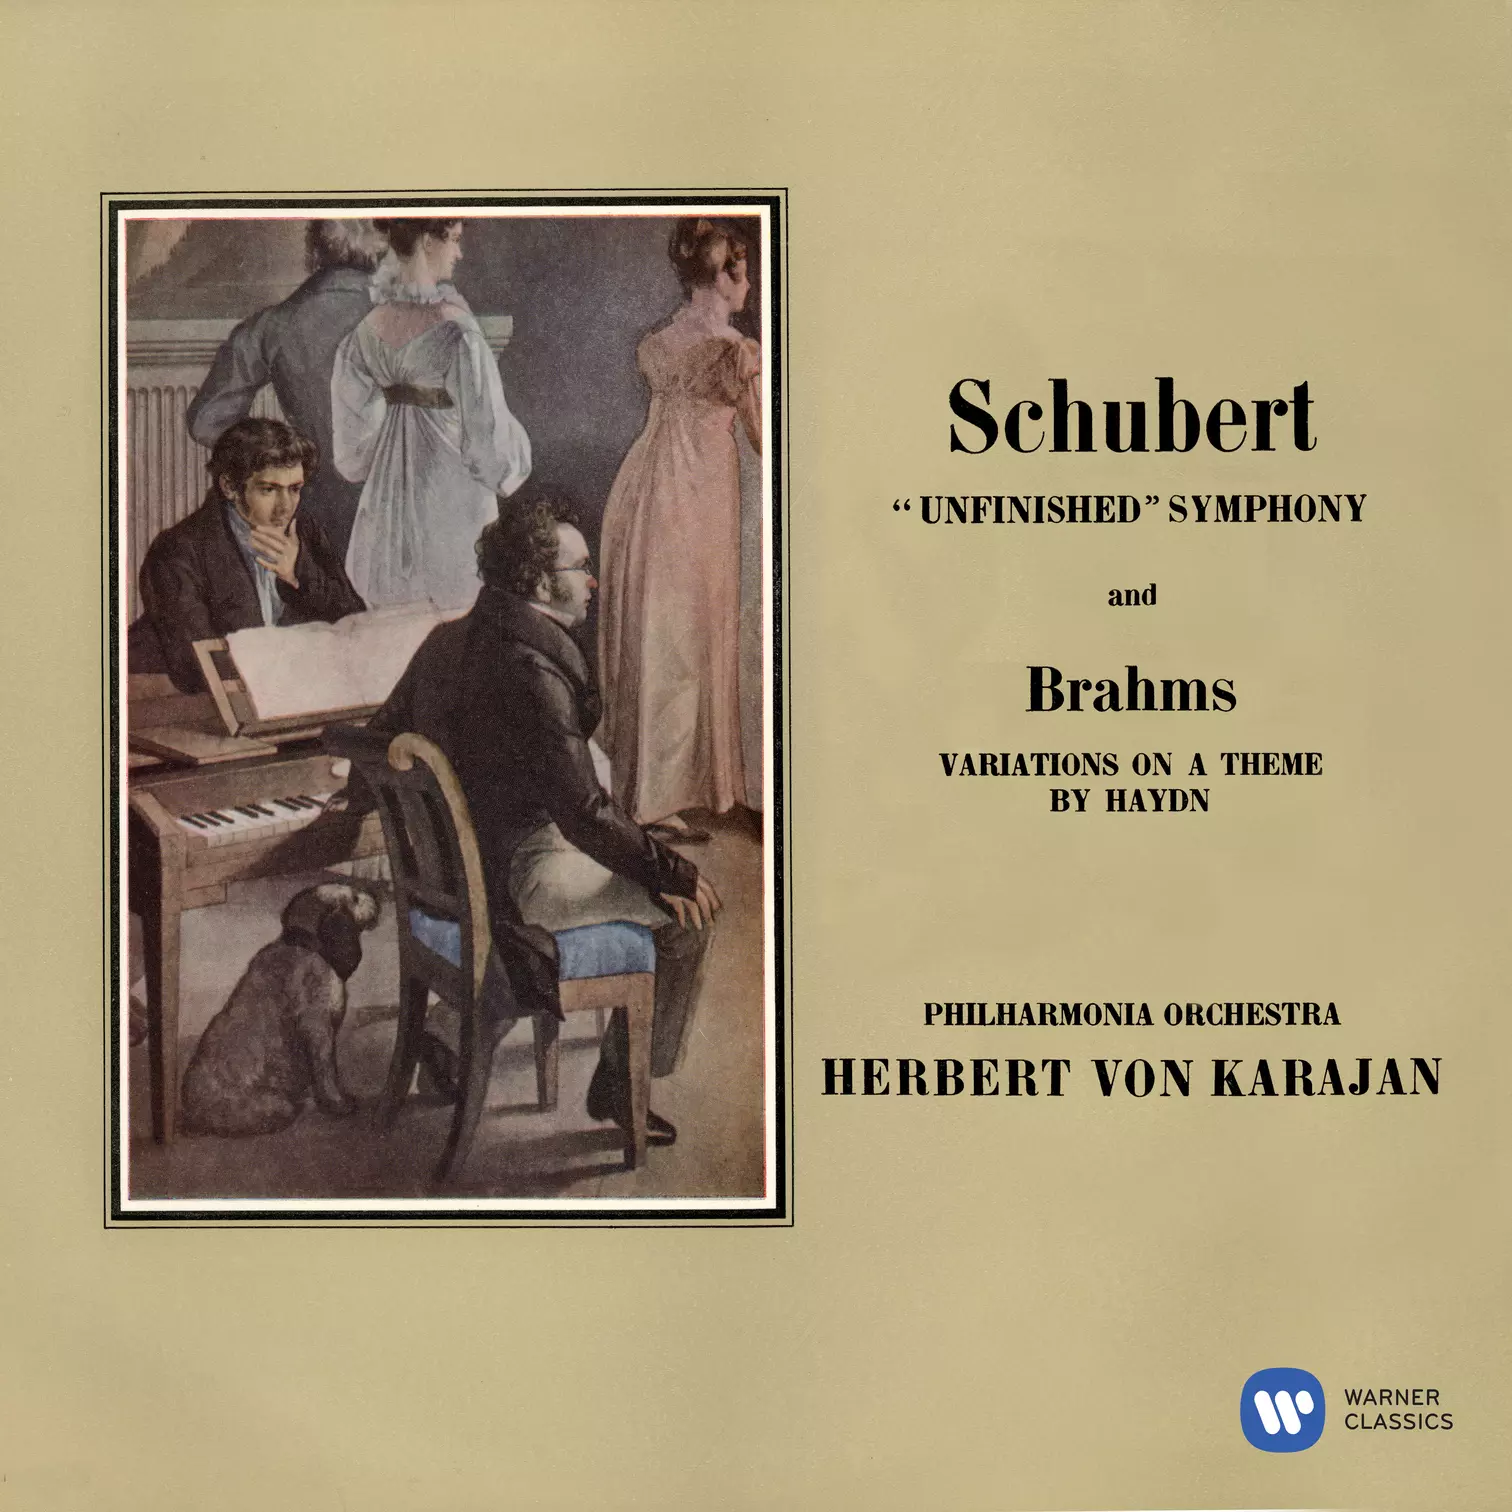 Schubert: Symphony No. 8 "Unfinished" - Brahms: Variations on a Theme by Joseph Haydn, Op. 56a